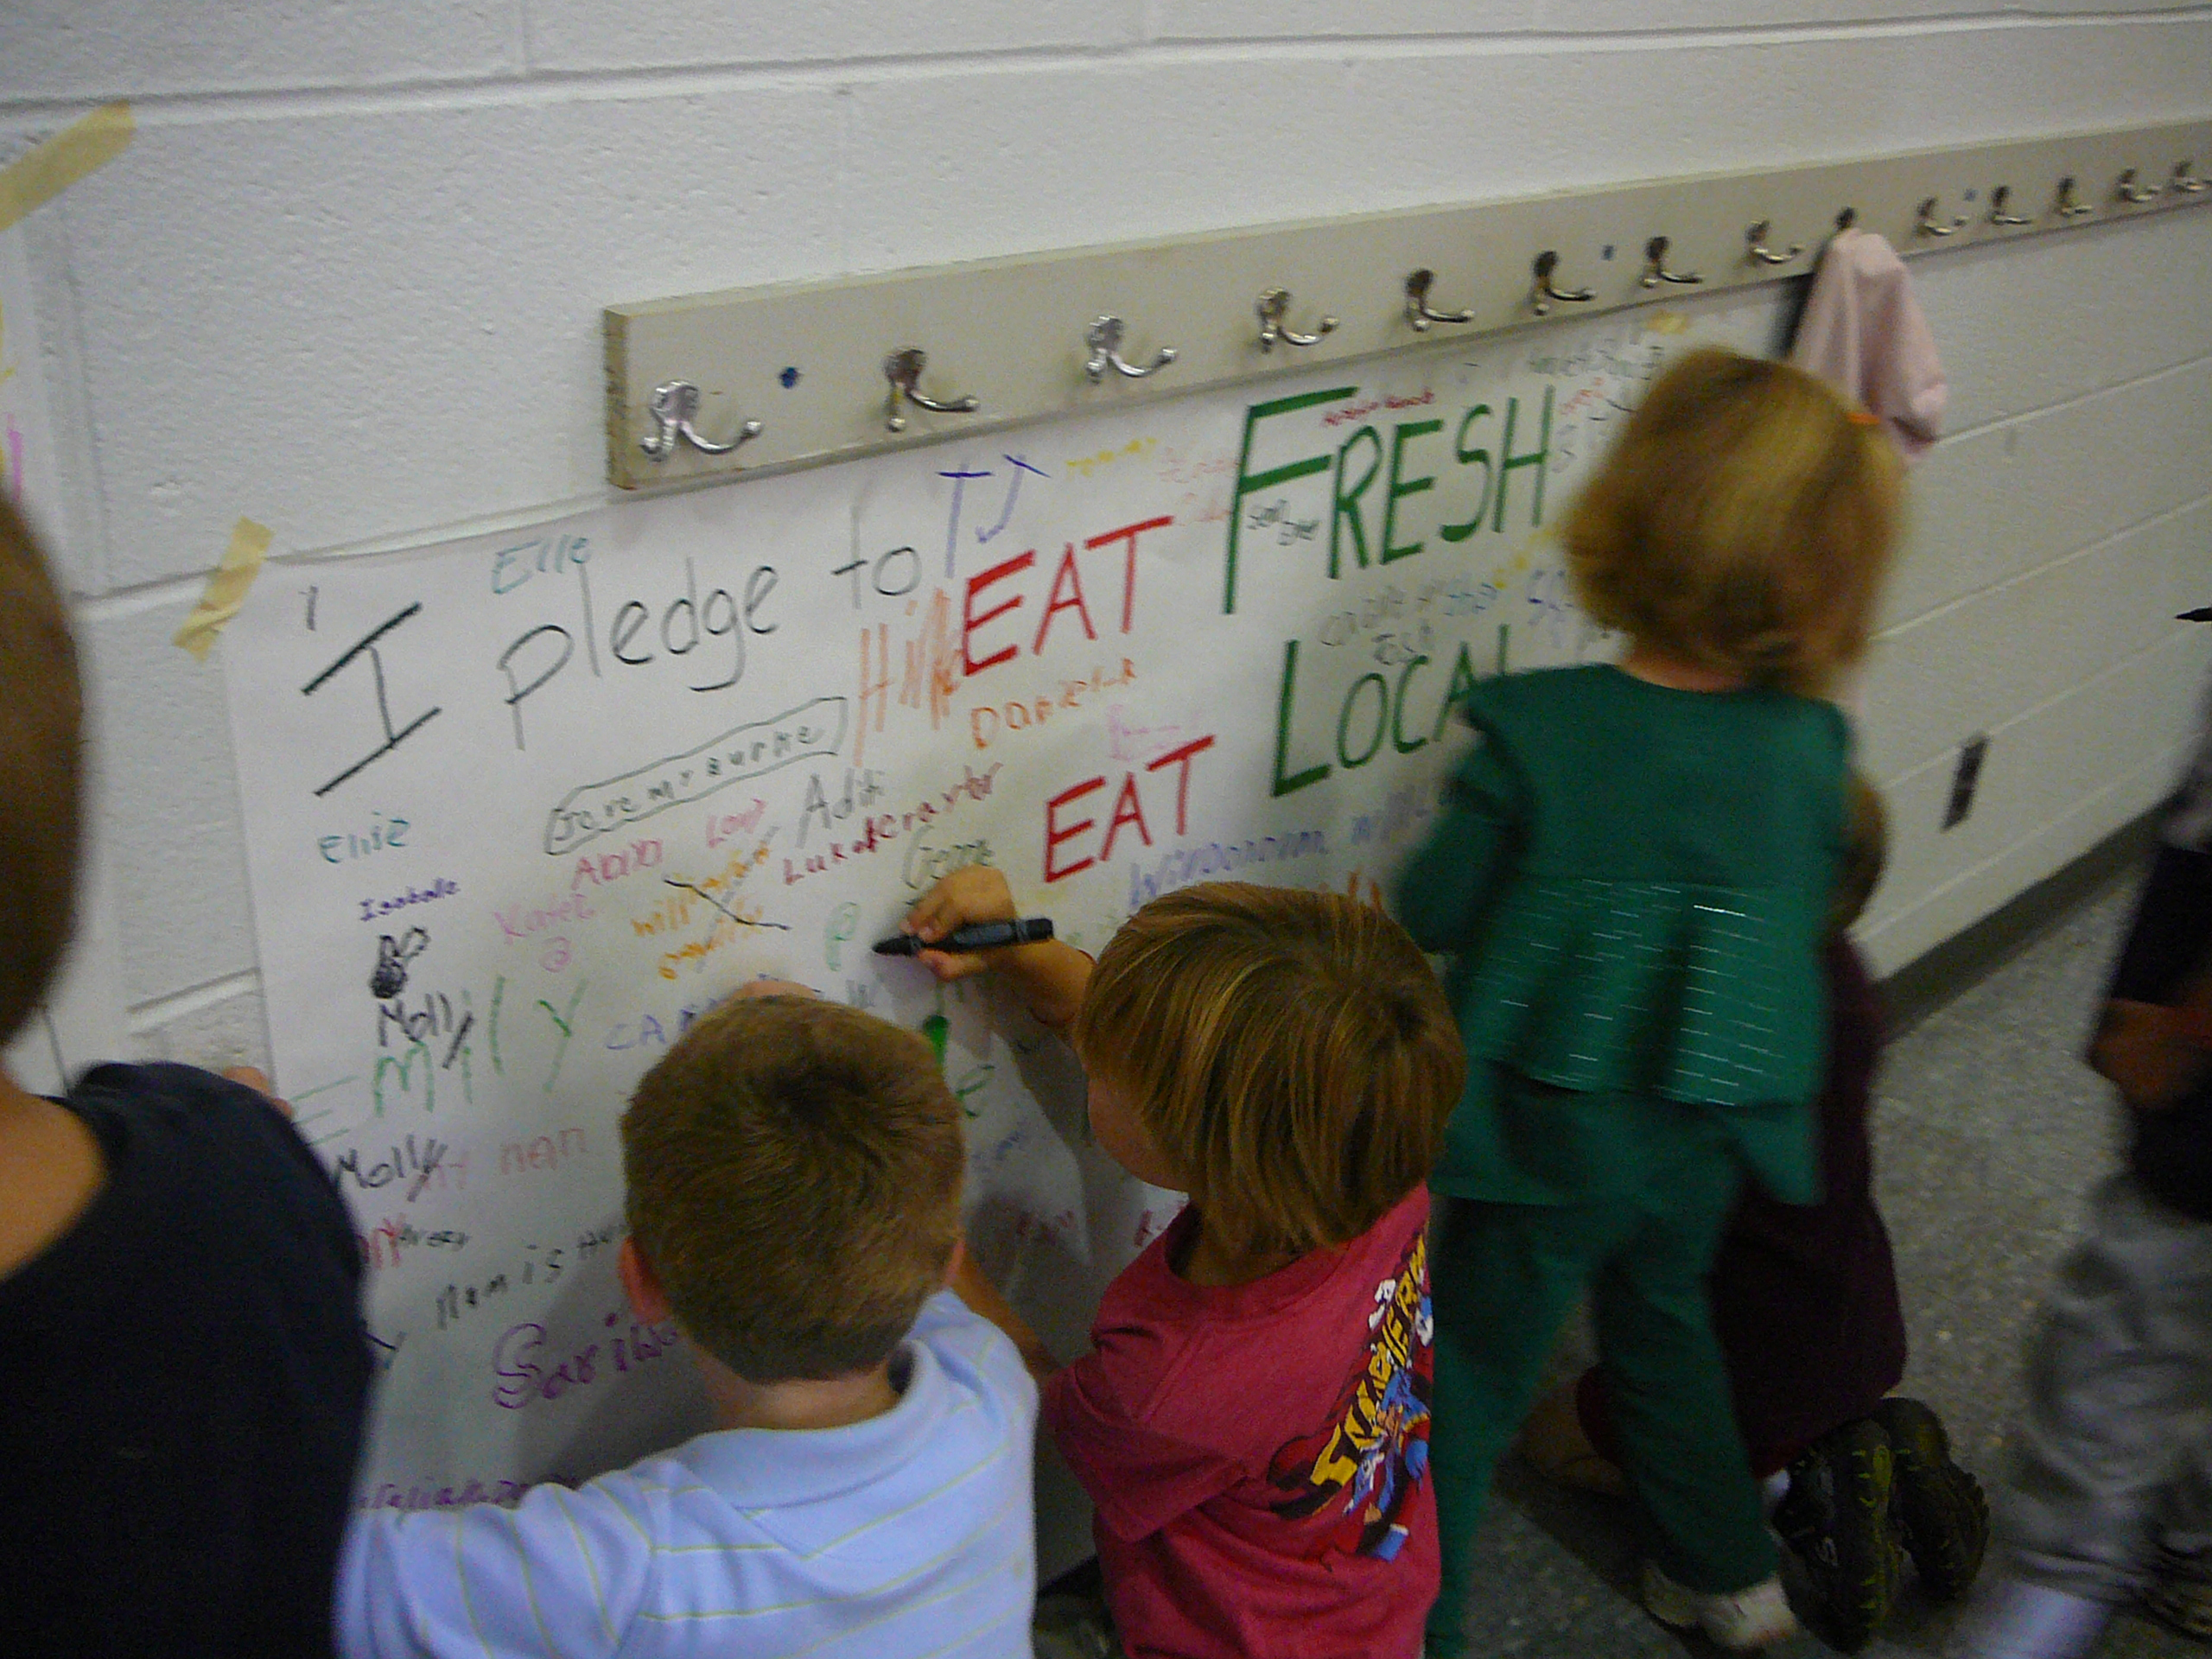 Children writing and drawing on a paper banner that says Eat Fresh